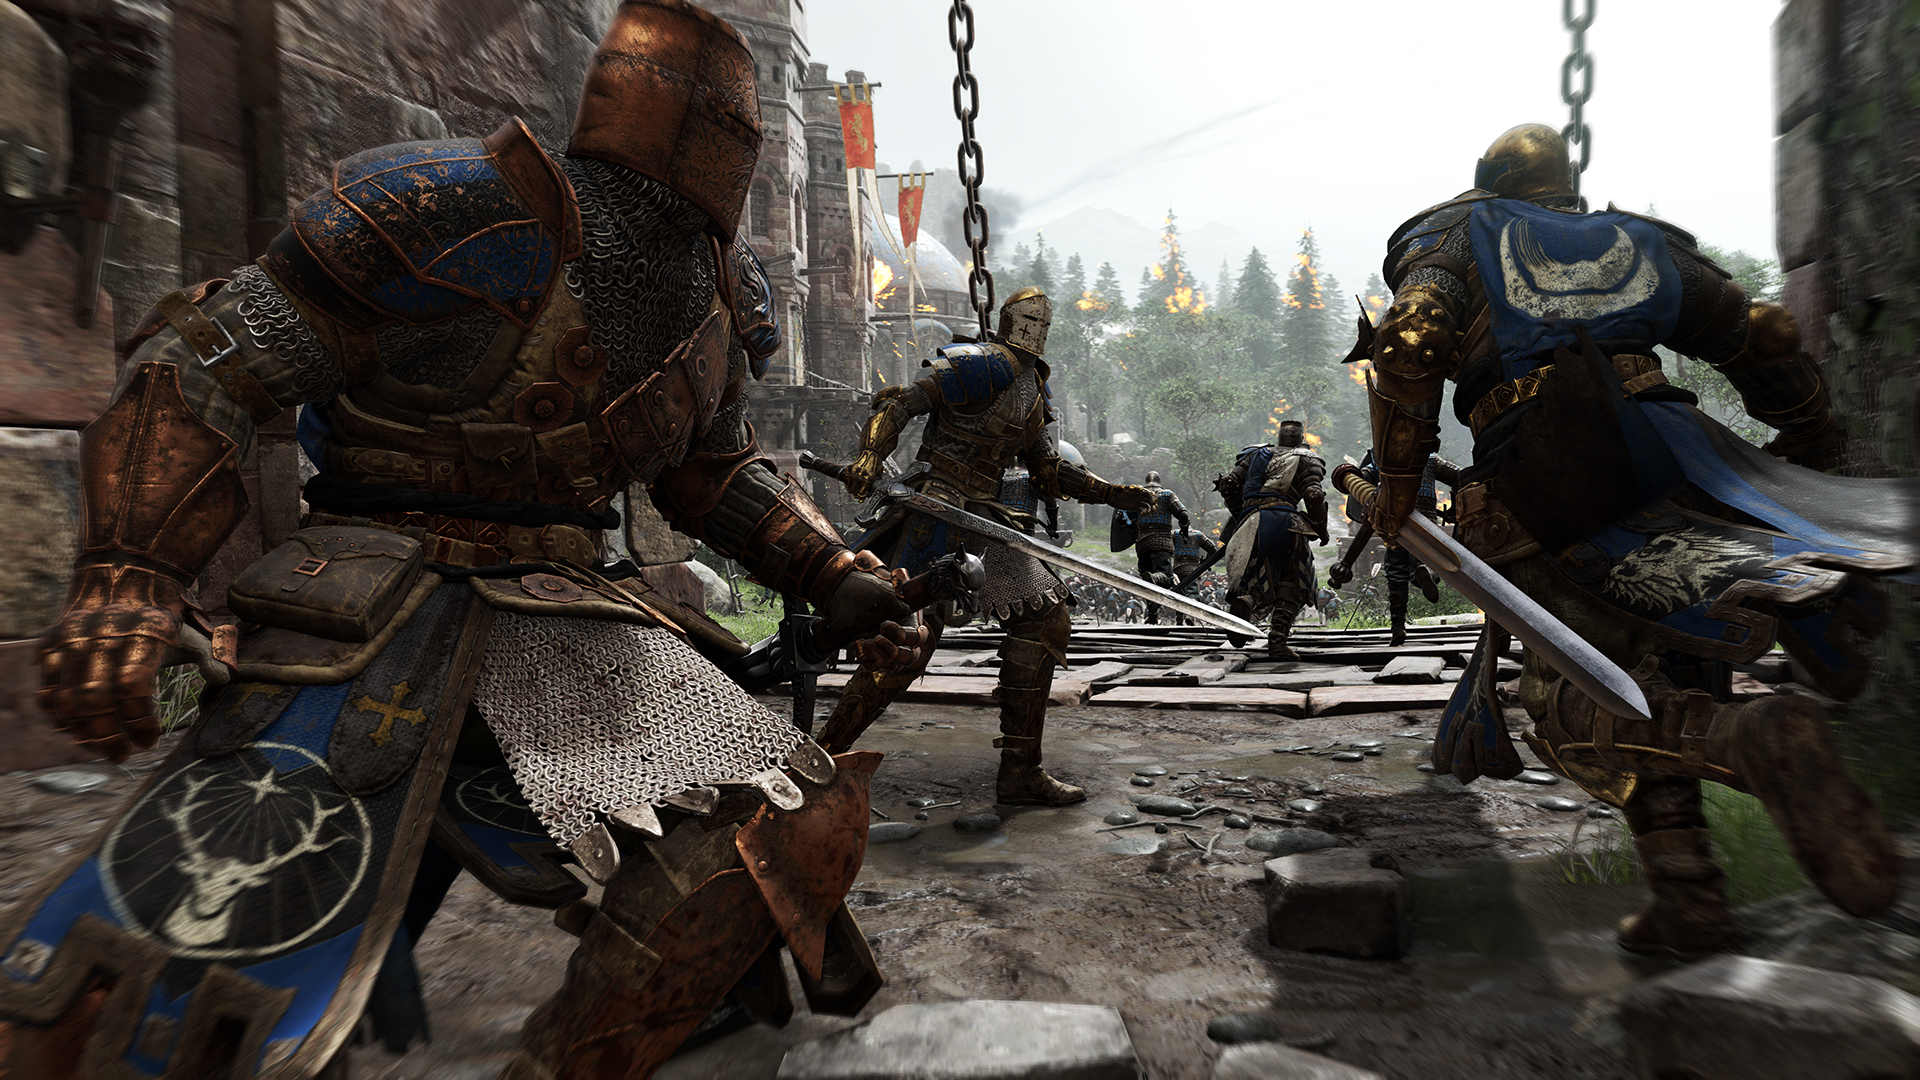 For_honor_screen_harrowgate_wardenintothefray_e3_150615_4pmpst_1434397104